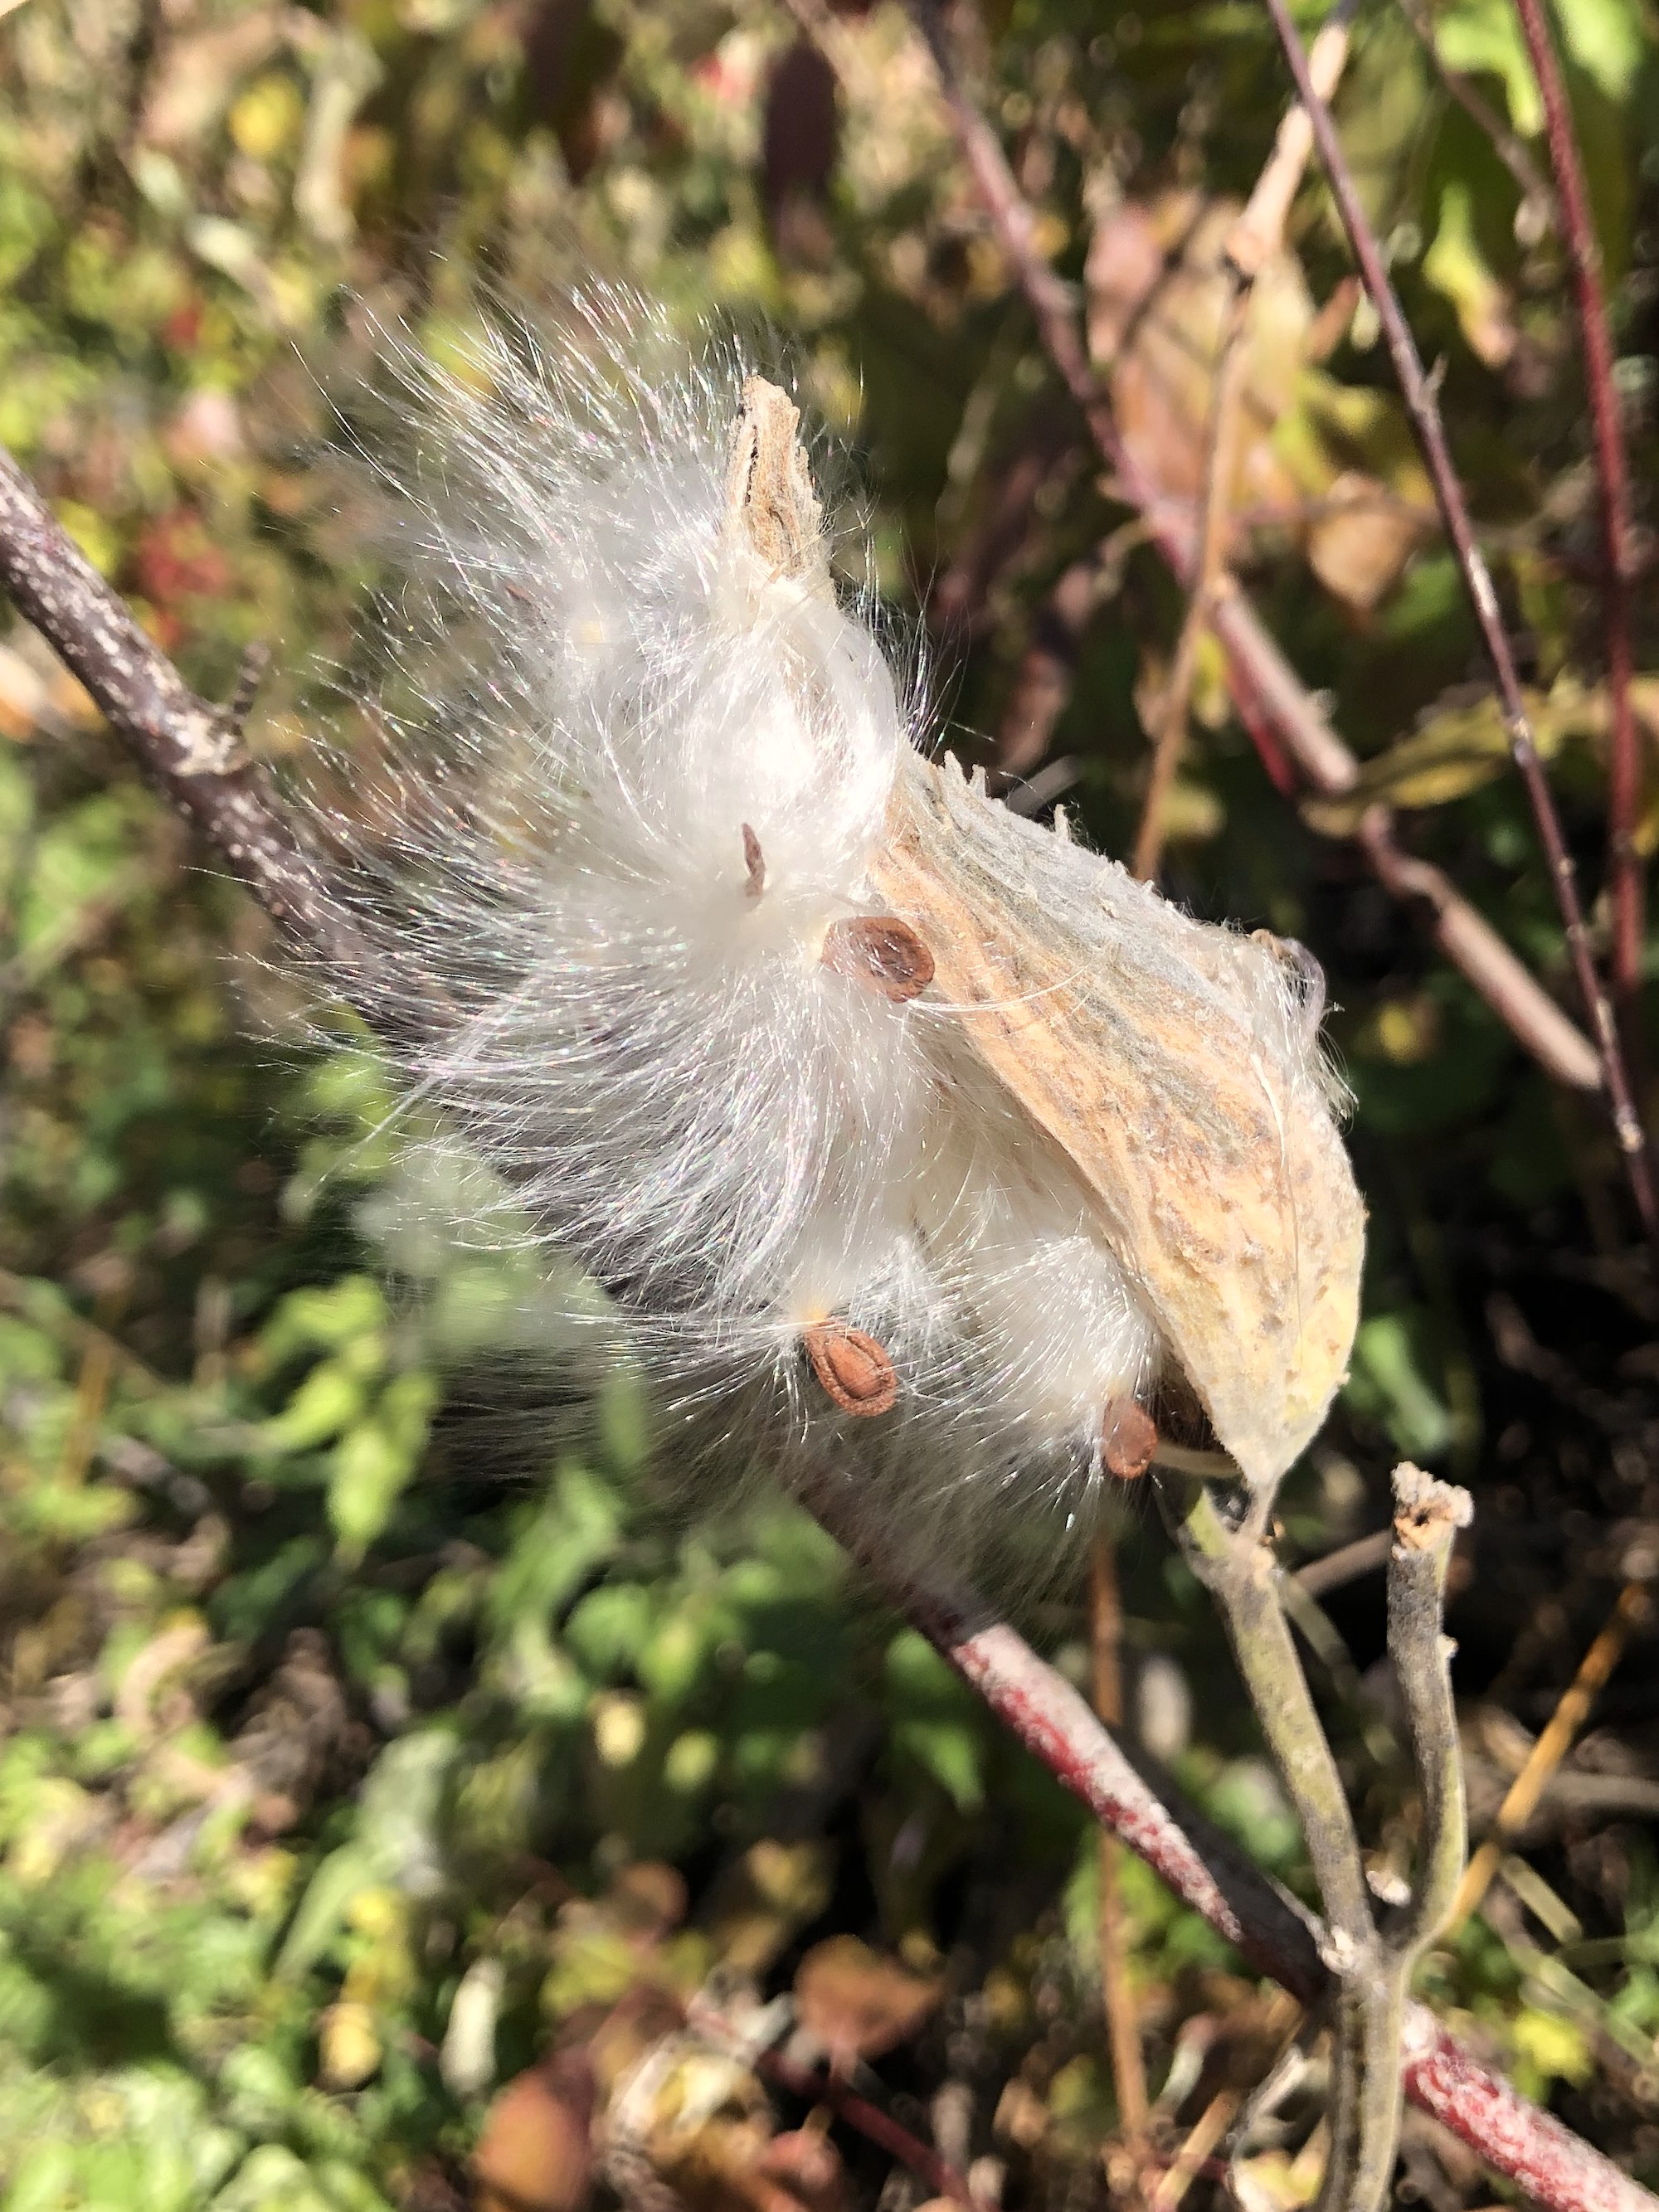 Common Milkweed on shore of Marion Dunn Pond on October 15, 2022.